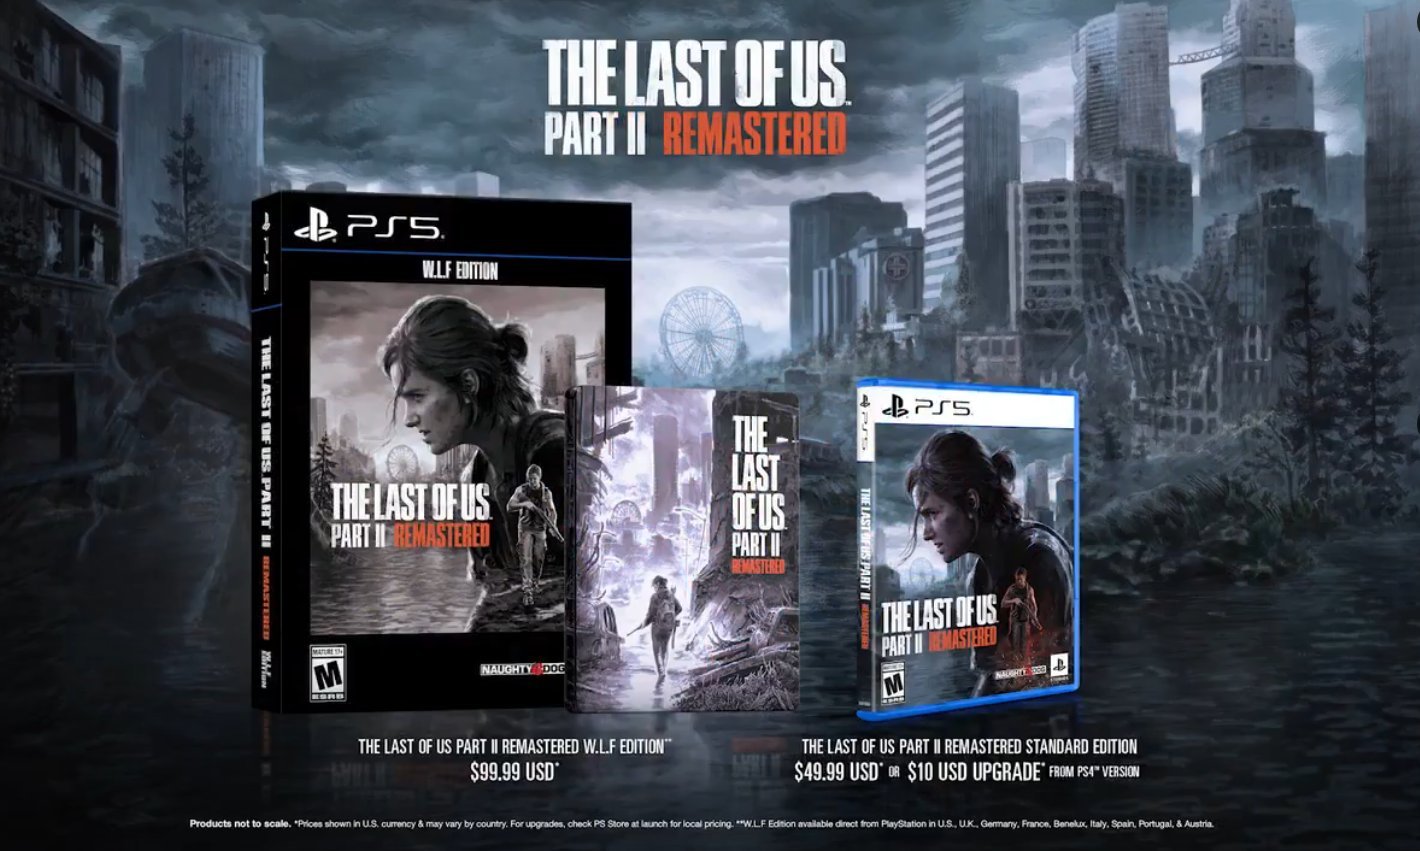 Naughty Dog on X: The Last of Us Part I Digital Deluxe Edition for PC is  now available to pre-purchase until release on 3.28.23! Grab early unlocks  of in-game items like skills